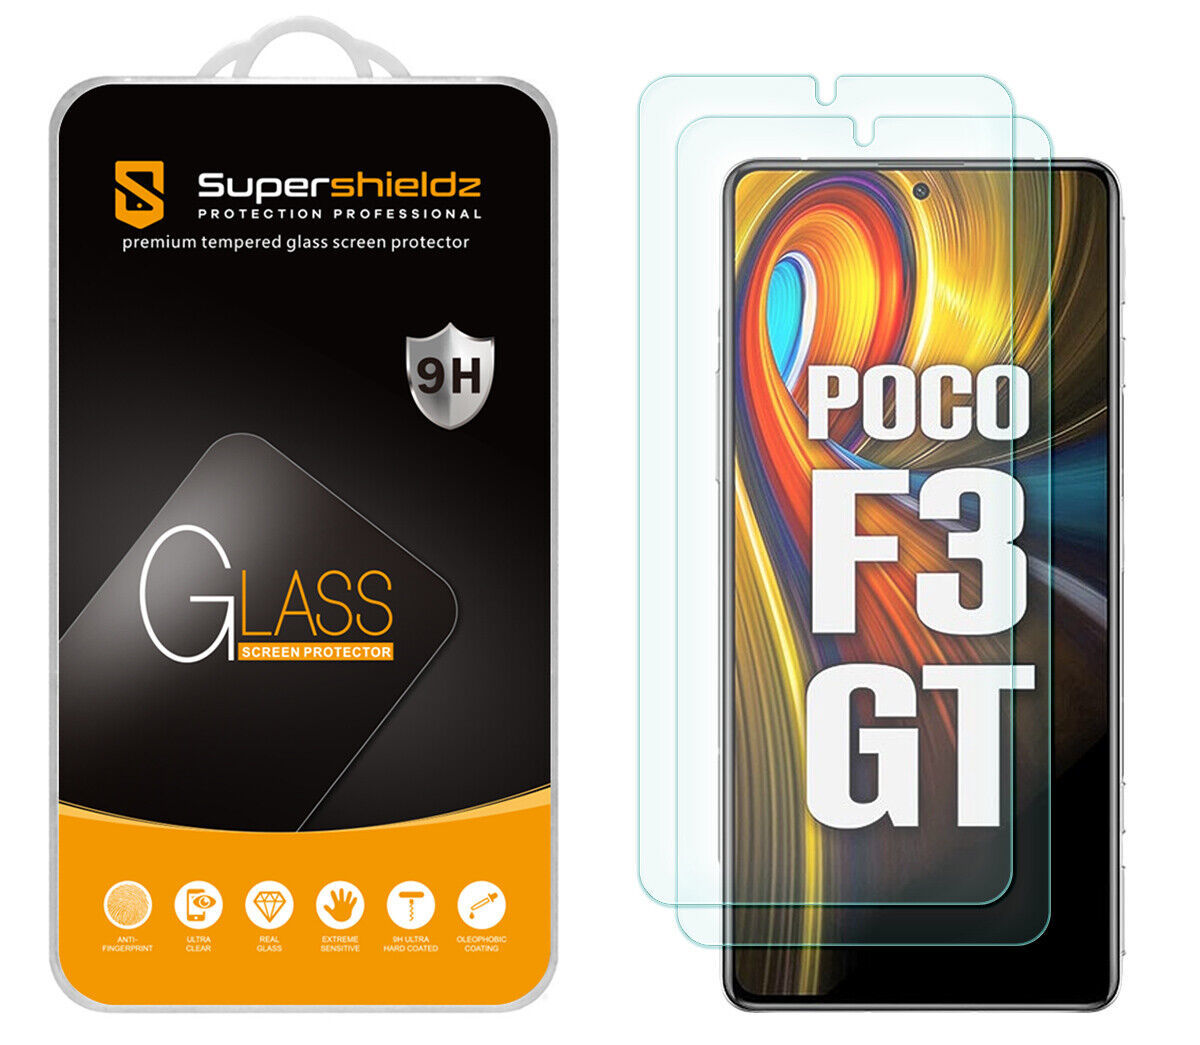 2X Tempered Glass Screen Protector For Xiaomi Poco F3 Gt/ Redmi K40 Gaming - $17.99